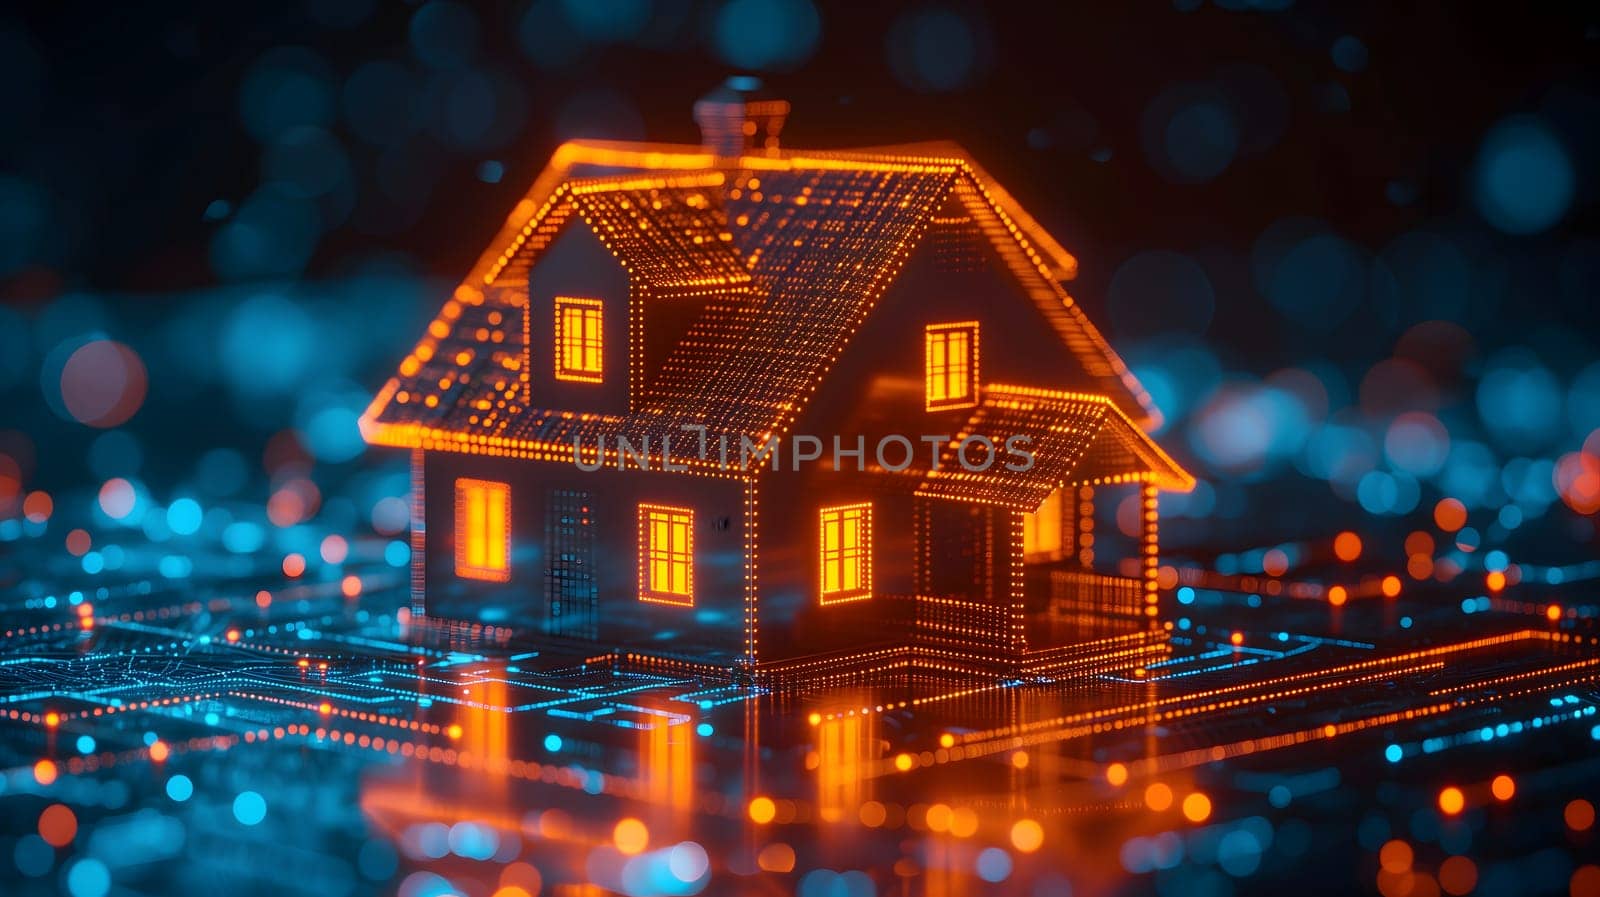 house hologram in futuristic digital background. Neural network generated image. Not based on any actual person or scene.